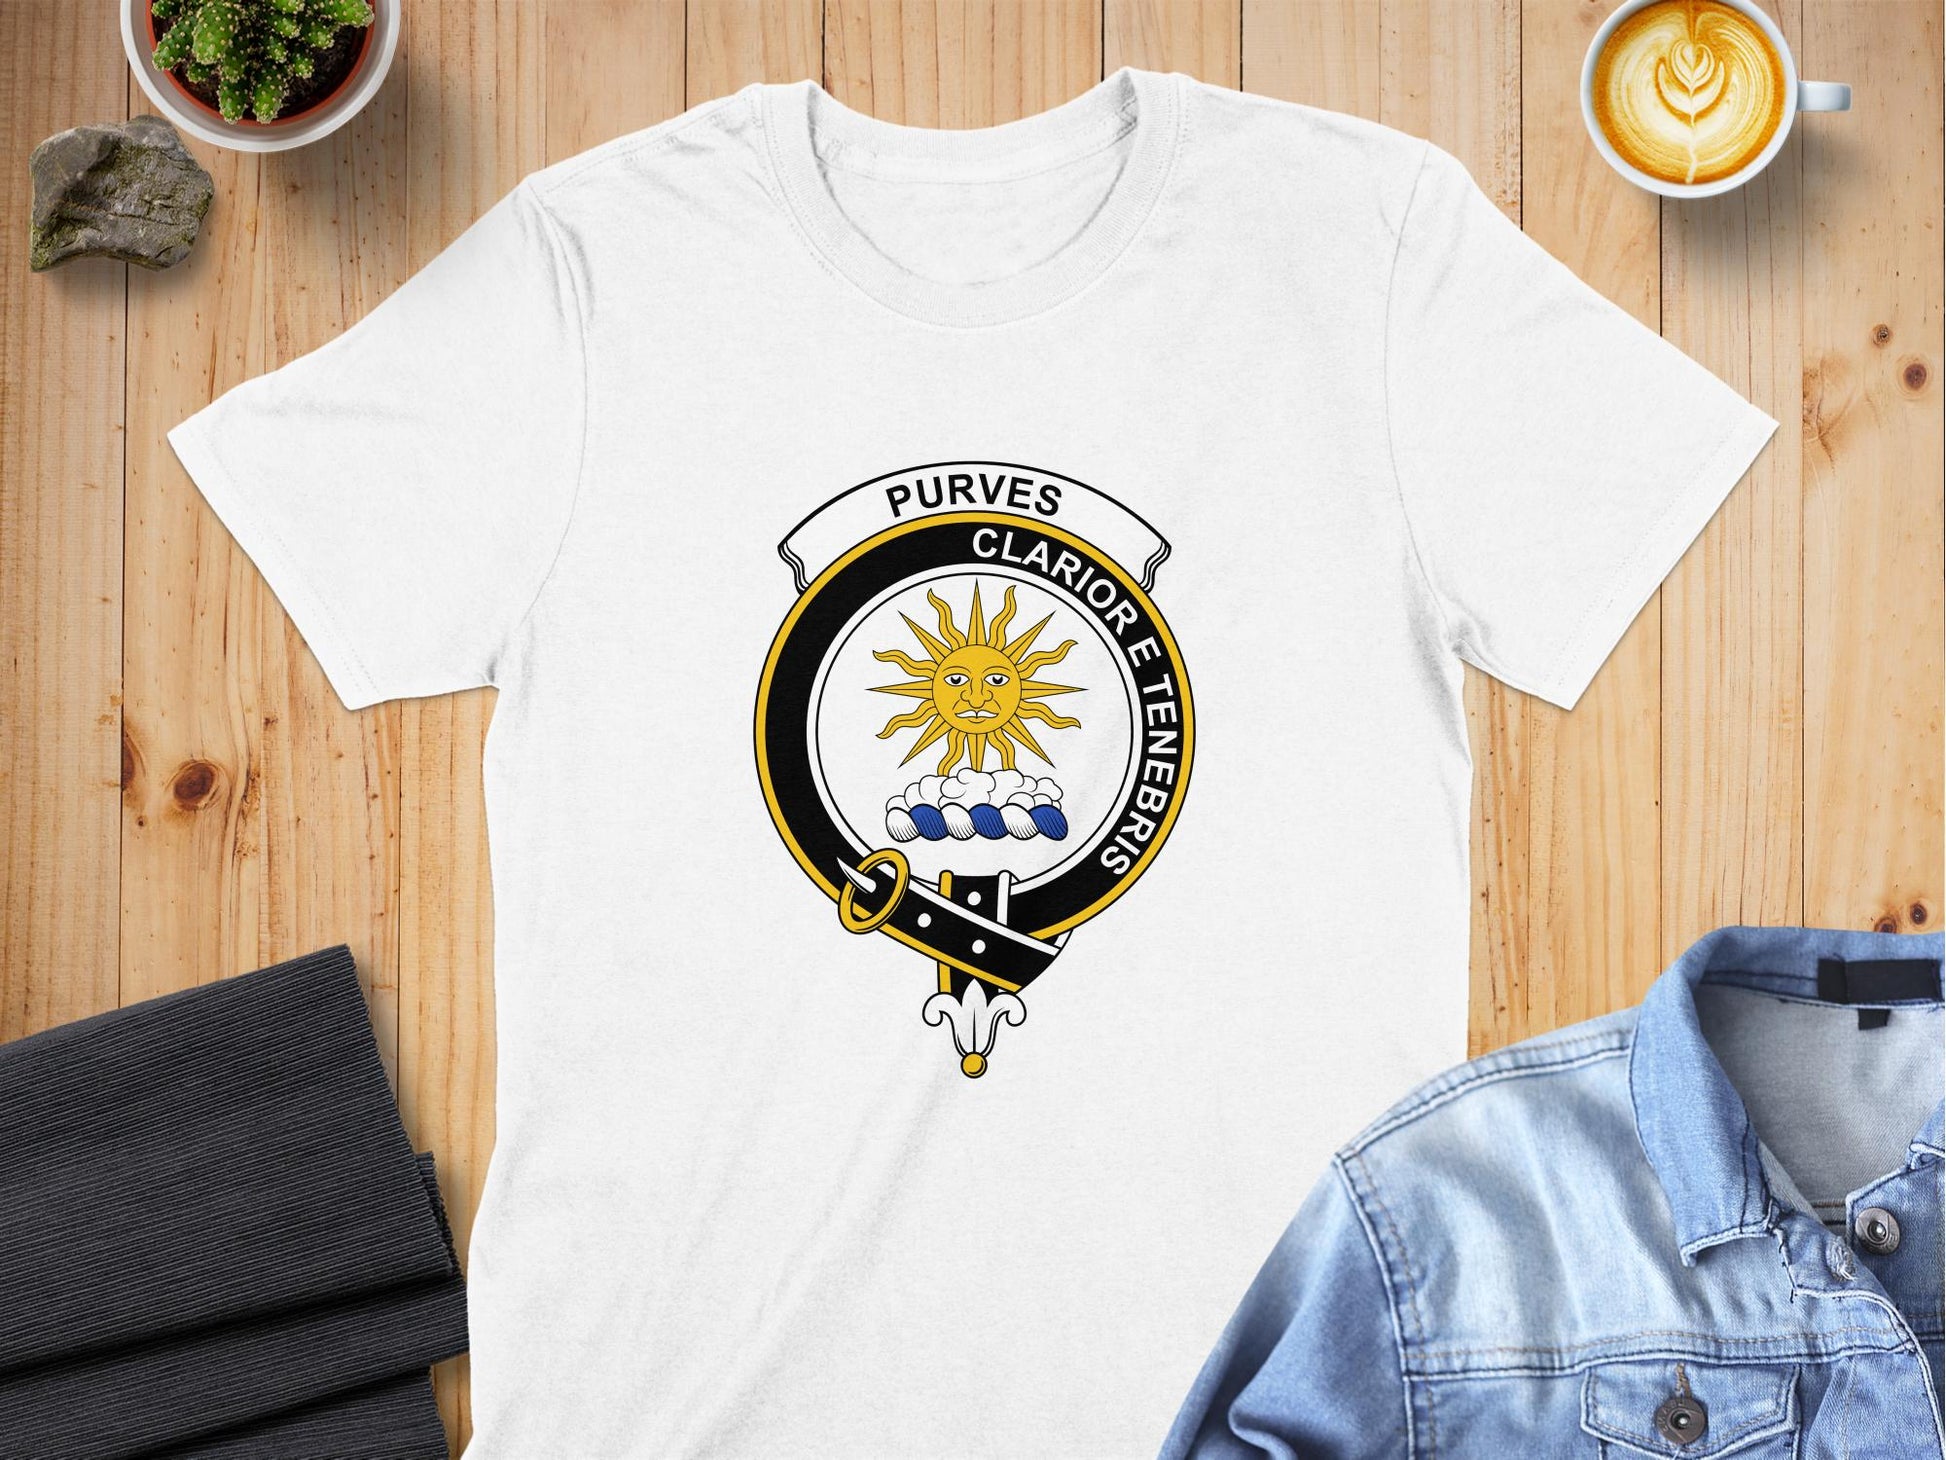 Purves Scottish Clan Crest Clarion E Tenebris T-Shirt - Living Stone Gifts